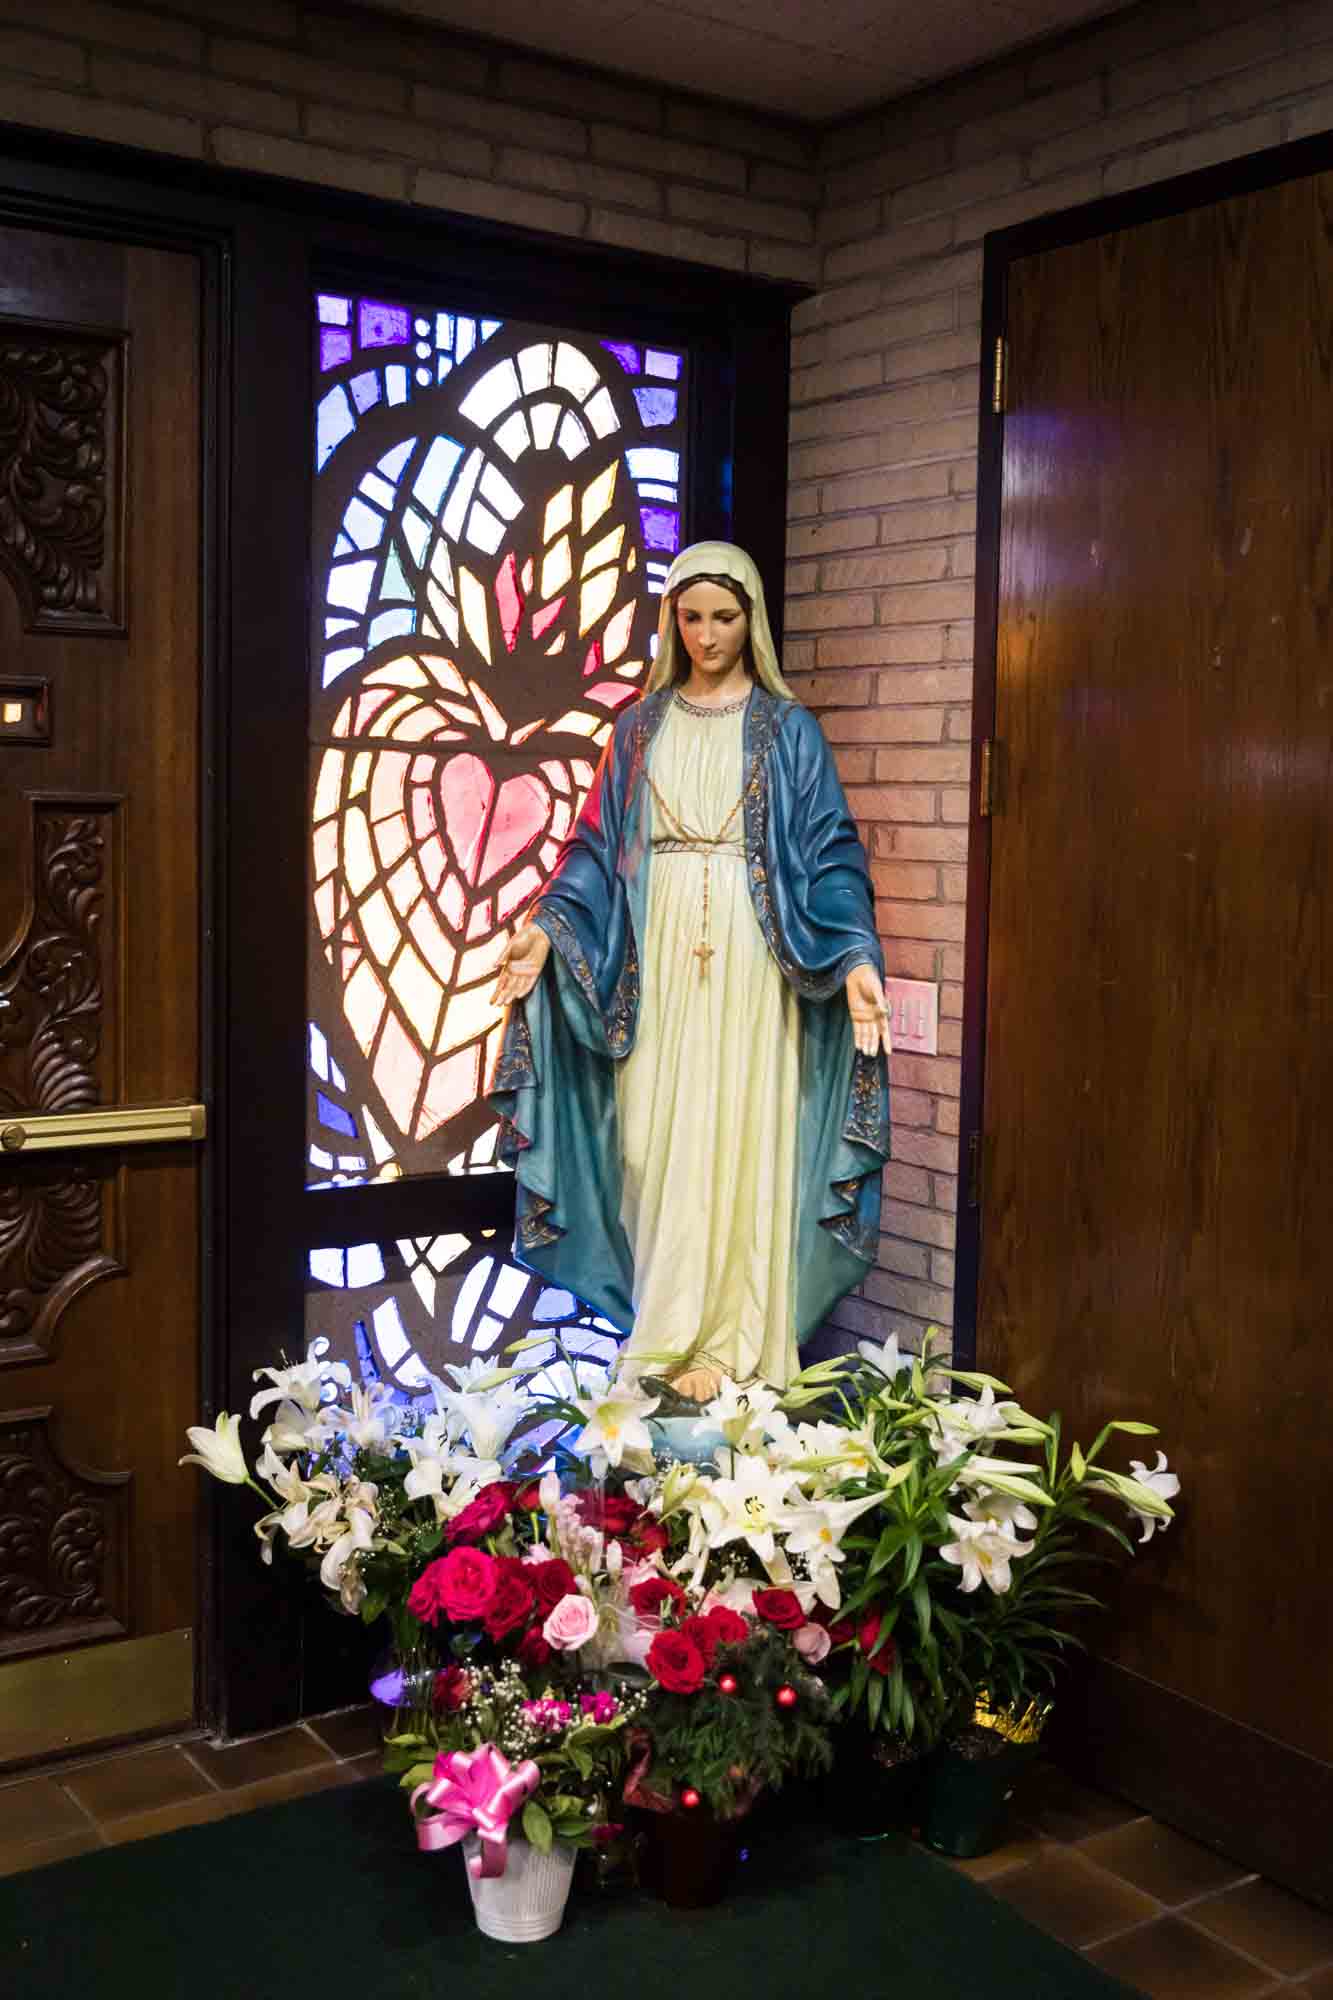 Statue of Virgin Mary in front of stained glass window with colorful flowers